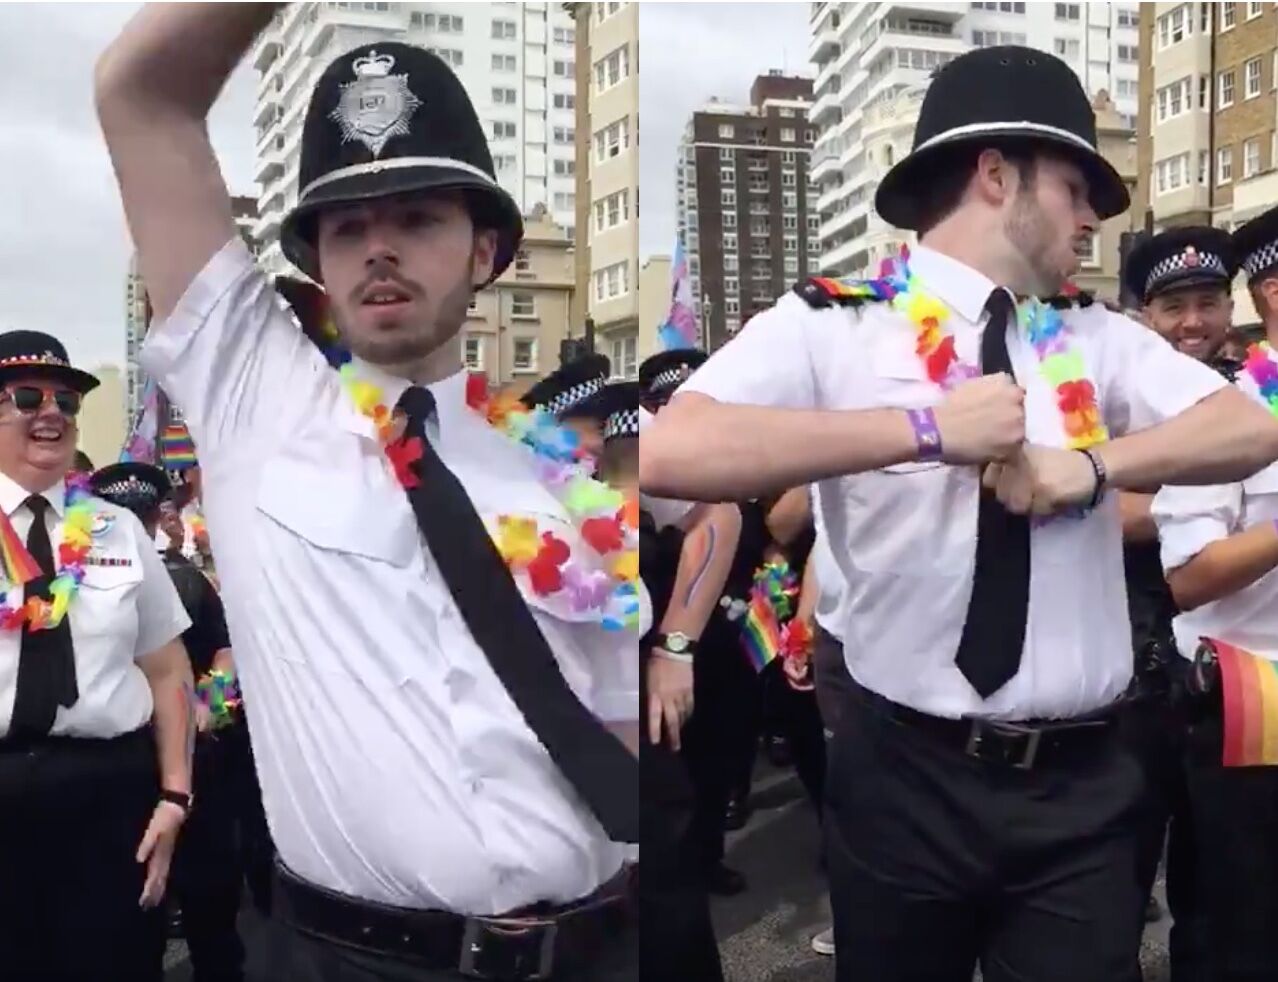 An unidentified police officer dances during the Brighton UK pride parade